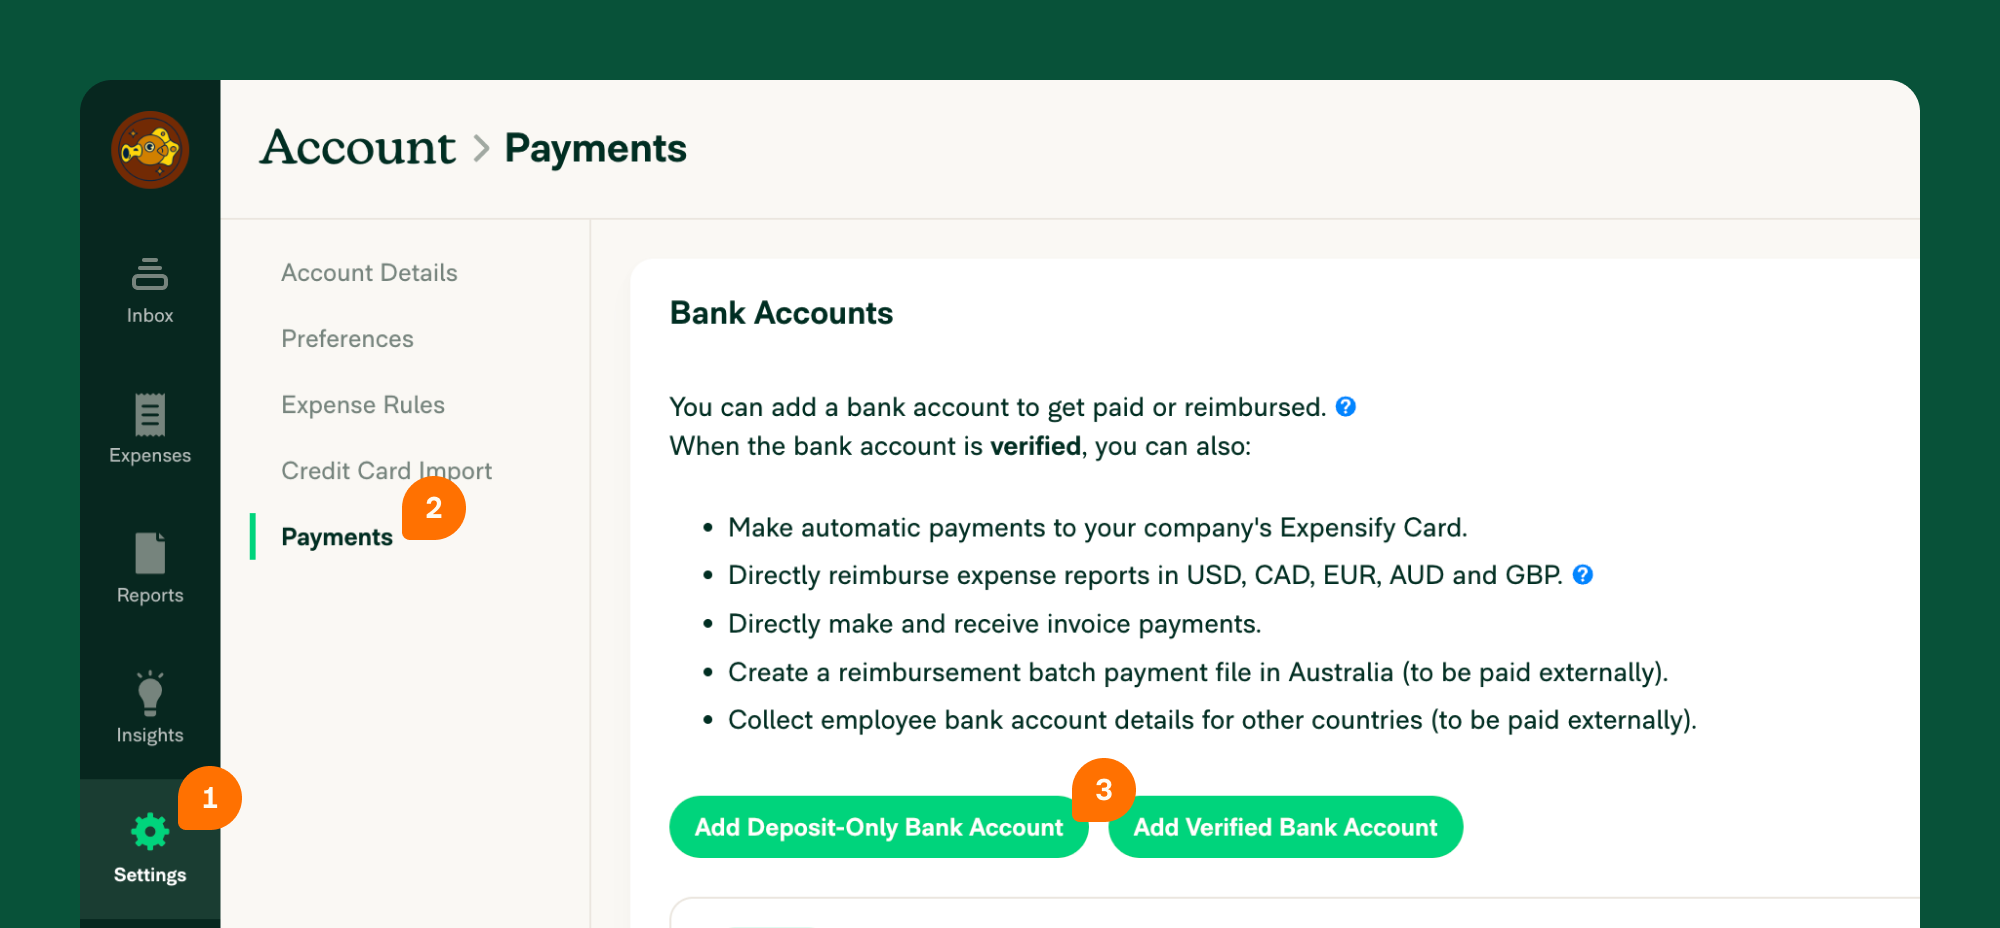 Click the Add Deposit-Only Bank Account button